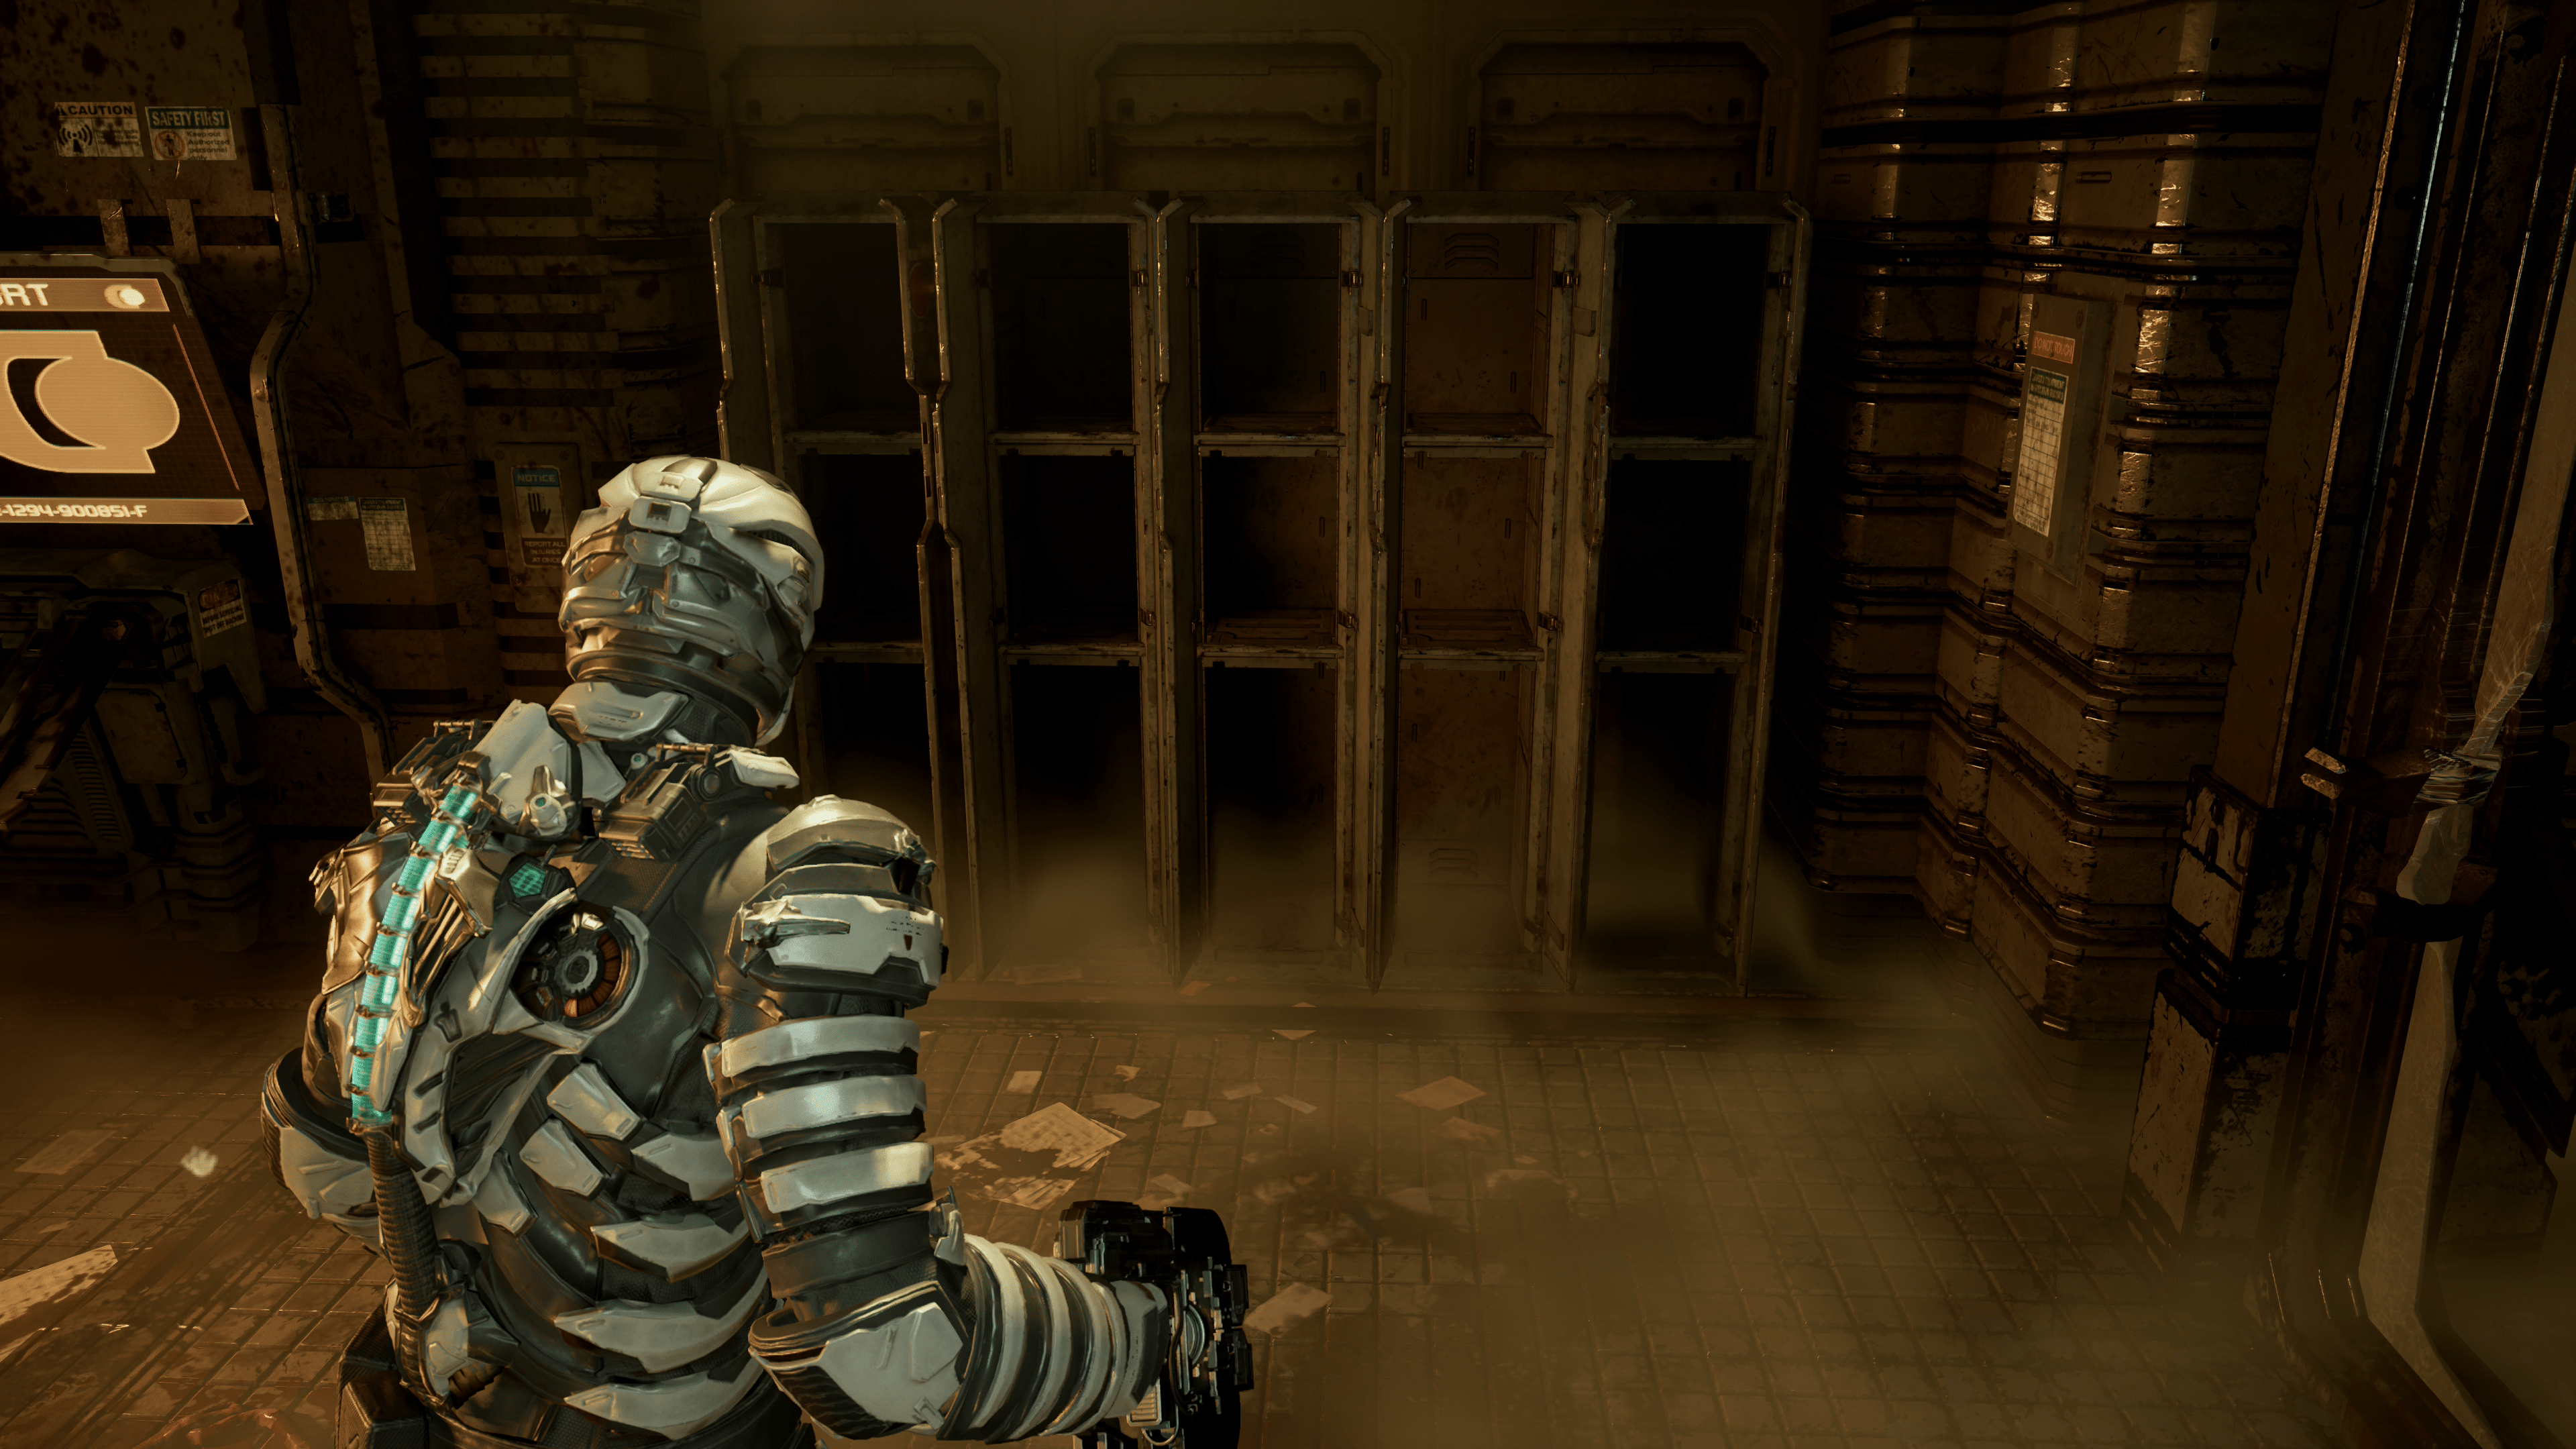 Dead Space remake: post-patch PS5 + Series X/S performance